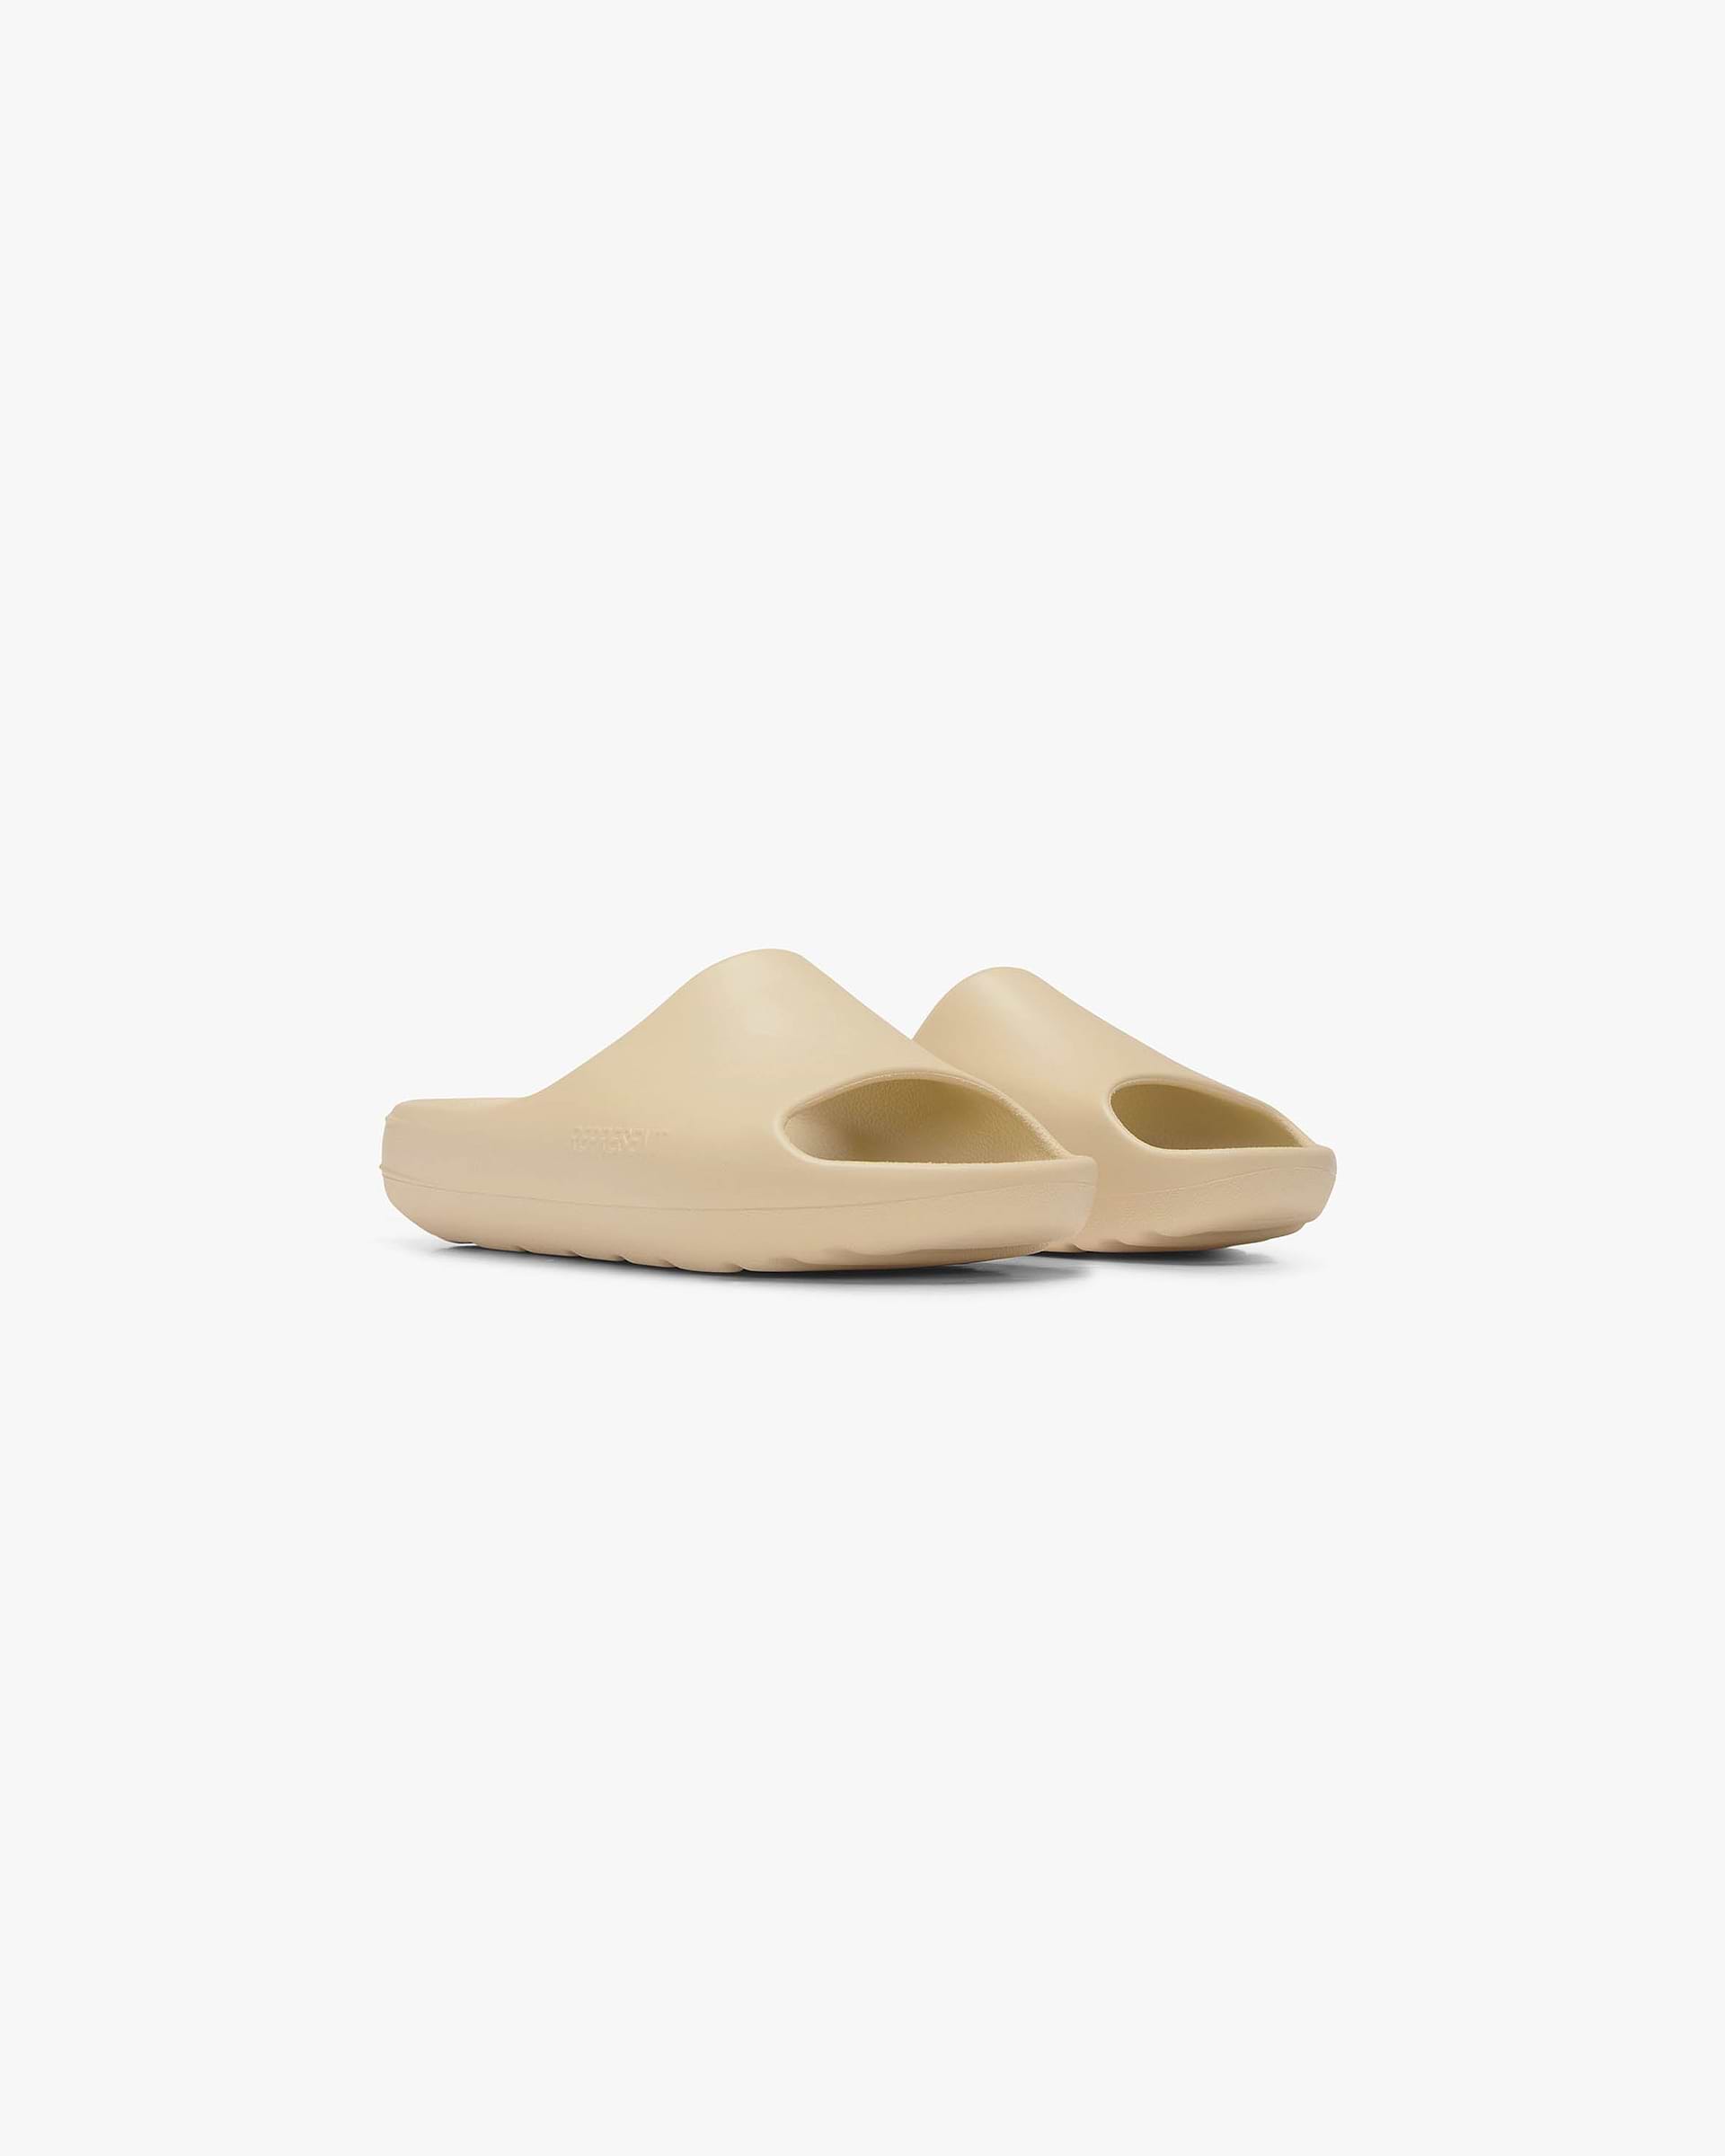 Sliders | Taupe Footwear SS22 | Represent Clo